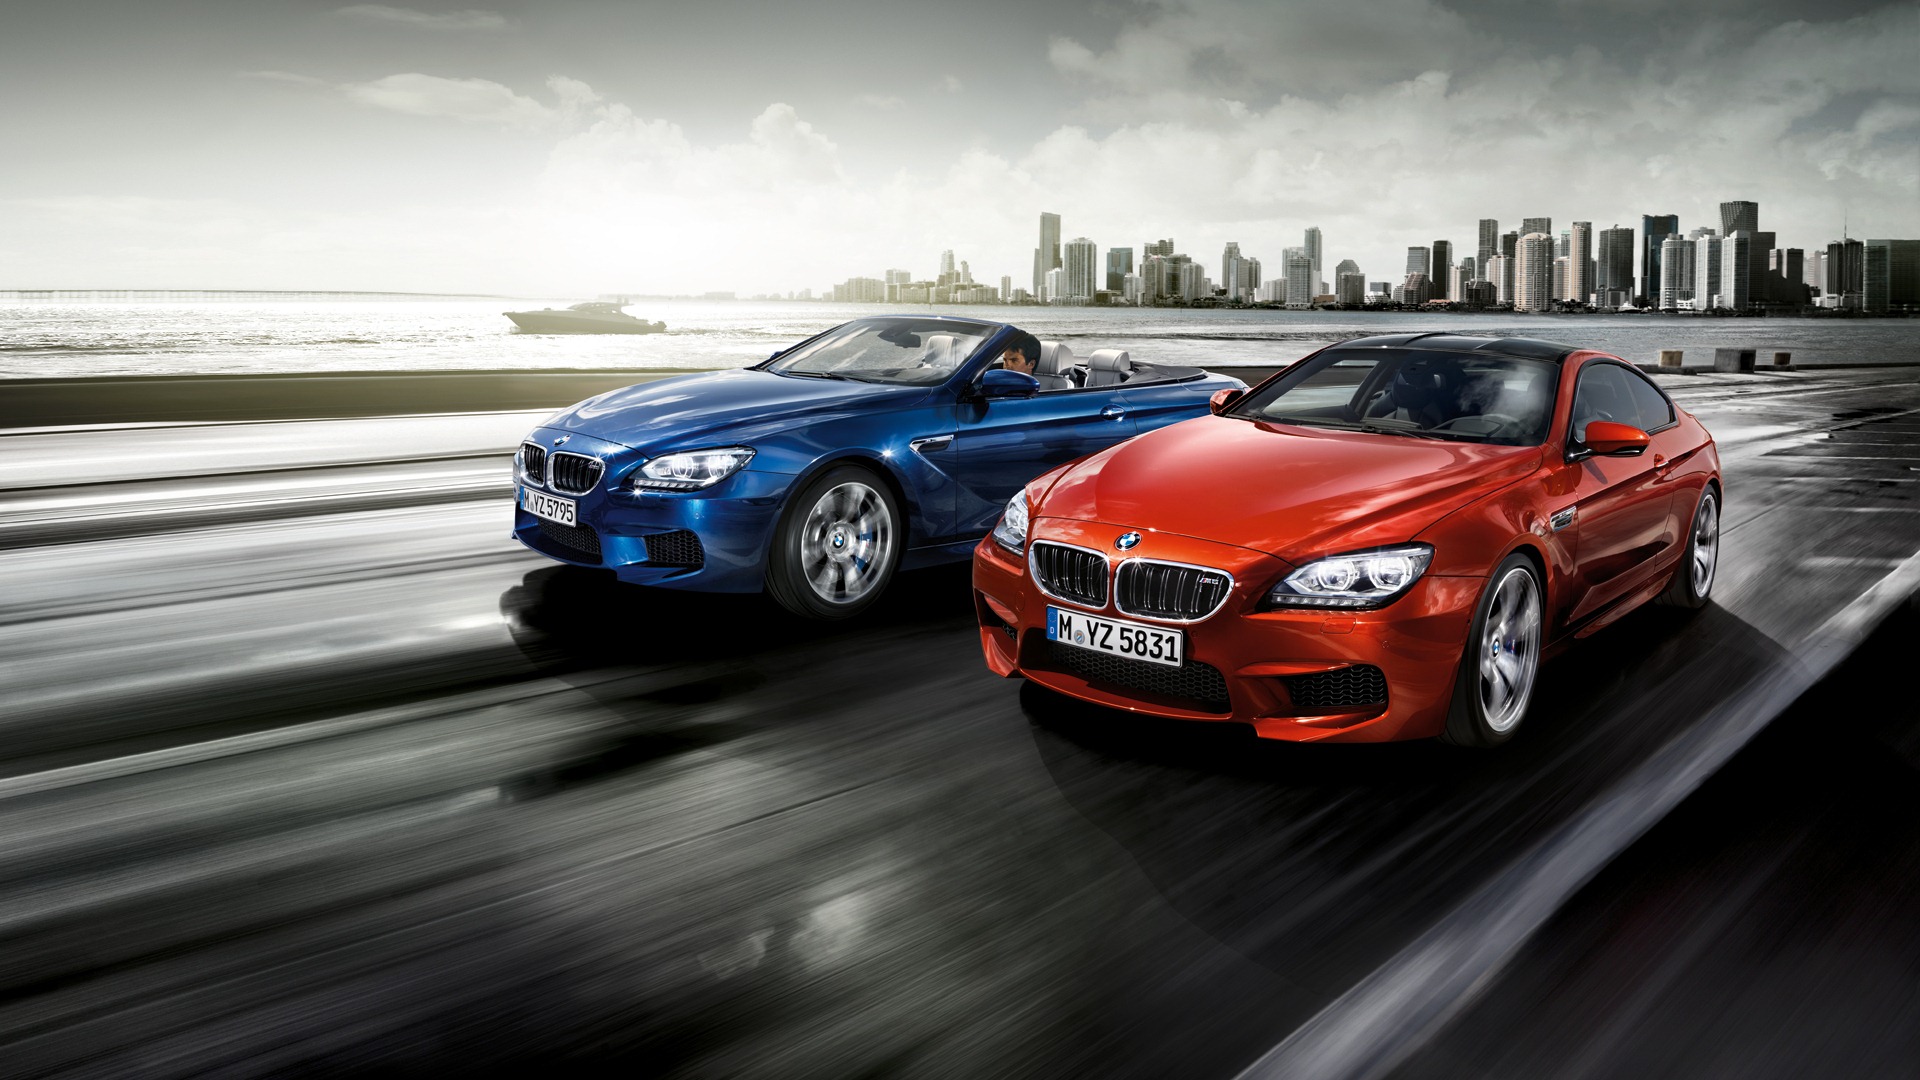 HD Wallpaper Background For Your Desktop Pc All Bmw Cars